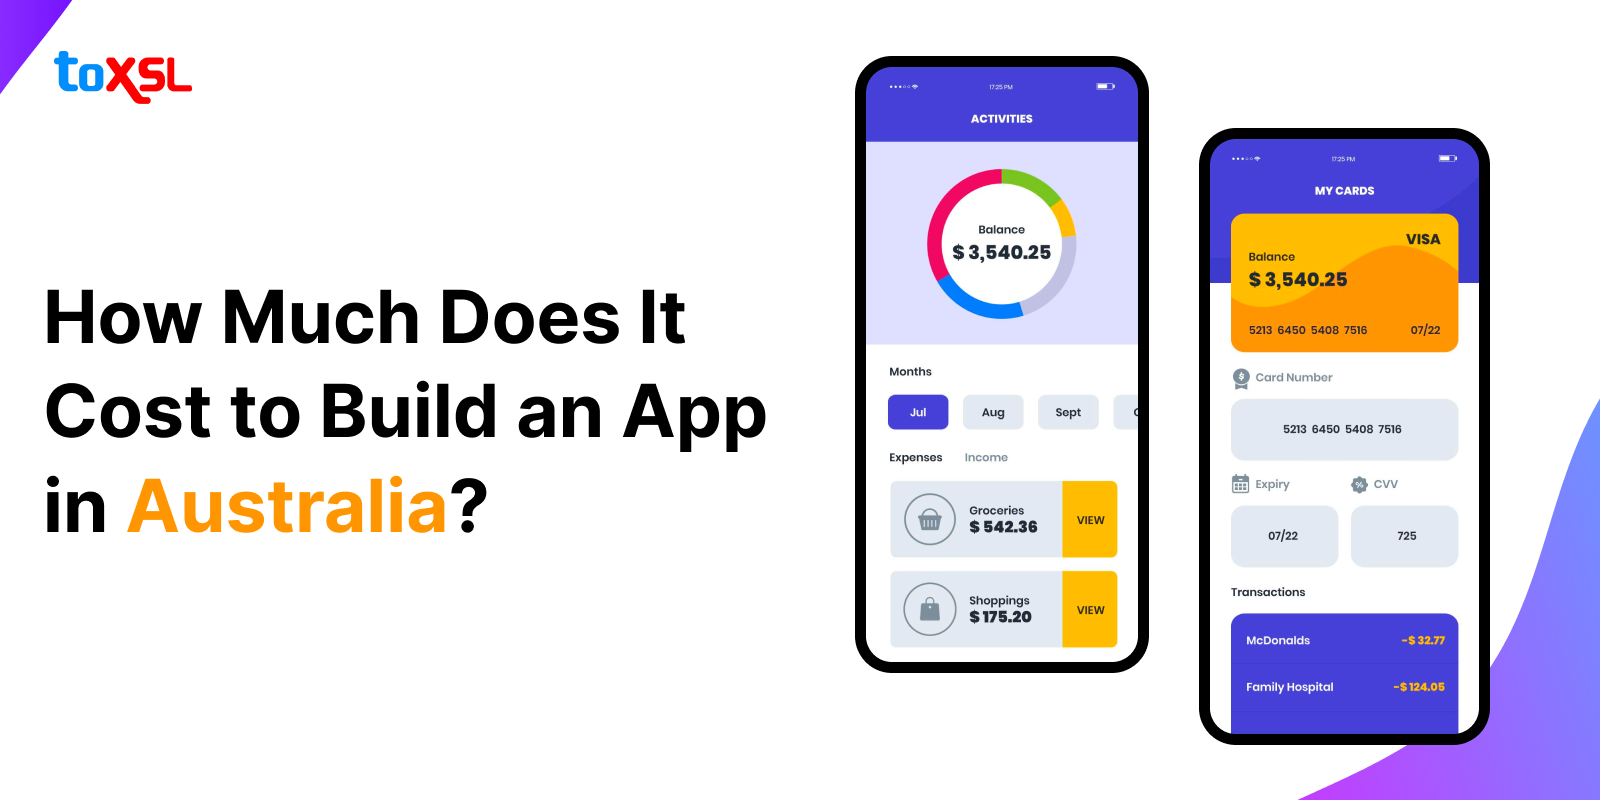 How Much Does It Cost to Build an App in Australia?